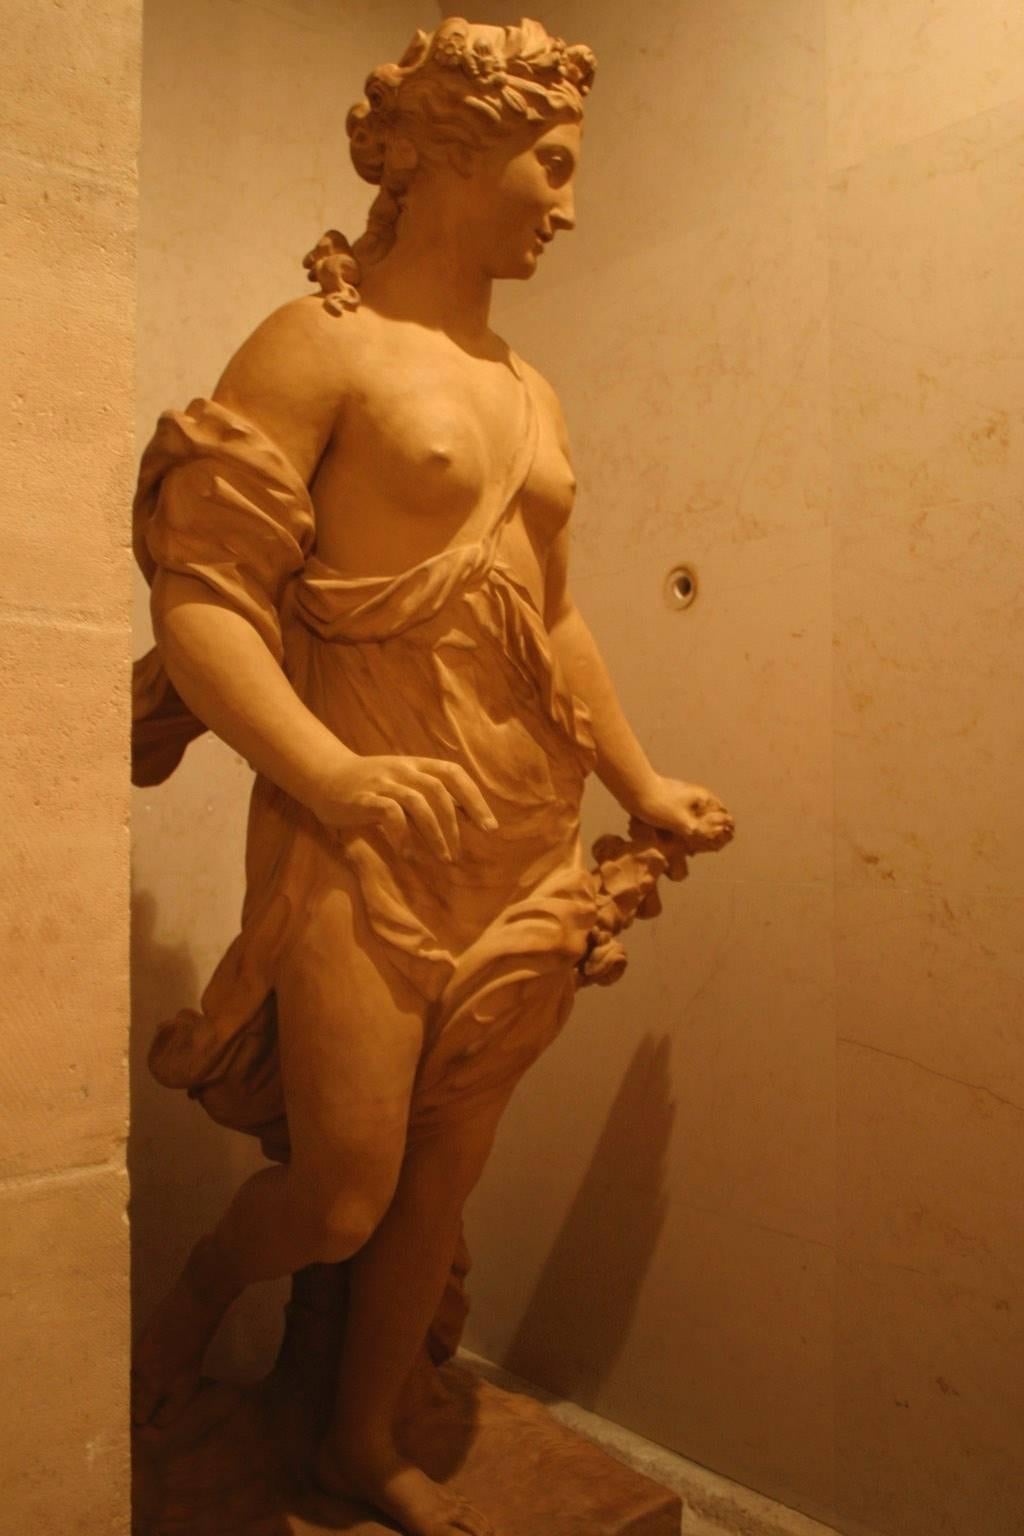 Art reproduction in terracotta after an 18th century model, manufactured circa 2016
Flora (1706-1709.) 
René Frémin (1672-1744) 180 x 80 x 80 cm.
Base: 63 x 58 cm, Louvre.
Frémin studied with the two greatest sculptors to have worked at